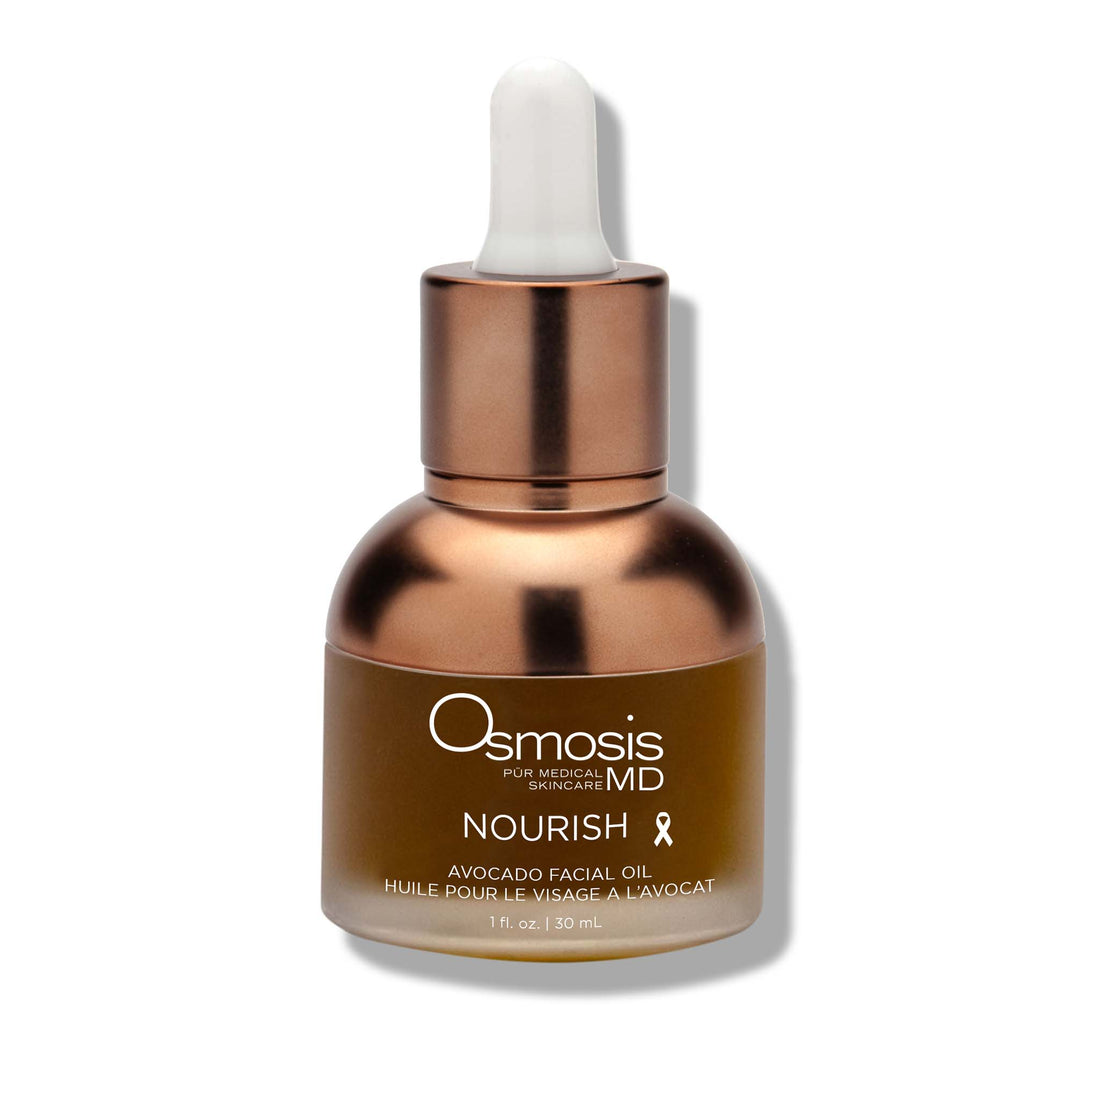 Osmosis Skincare MD Nourish Organic Facial Oil can be used by itself or added to a daily moisturizer to boost hydration.